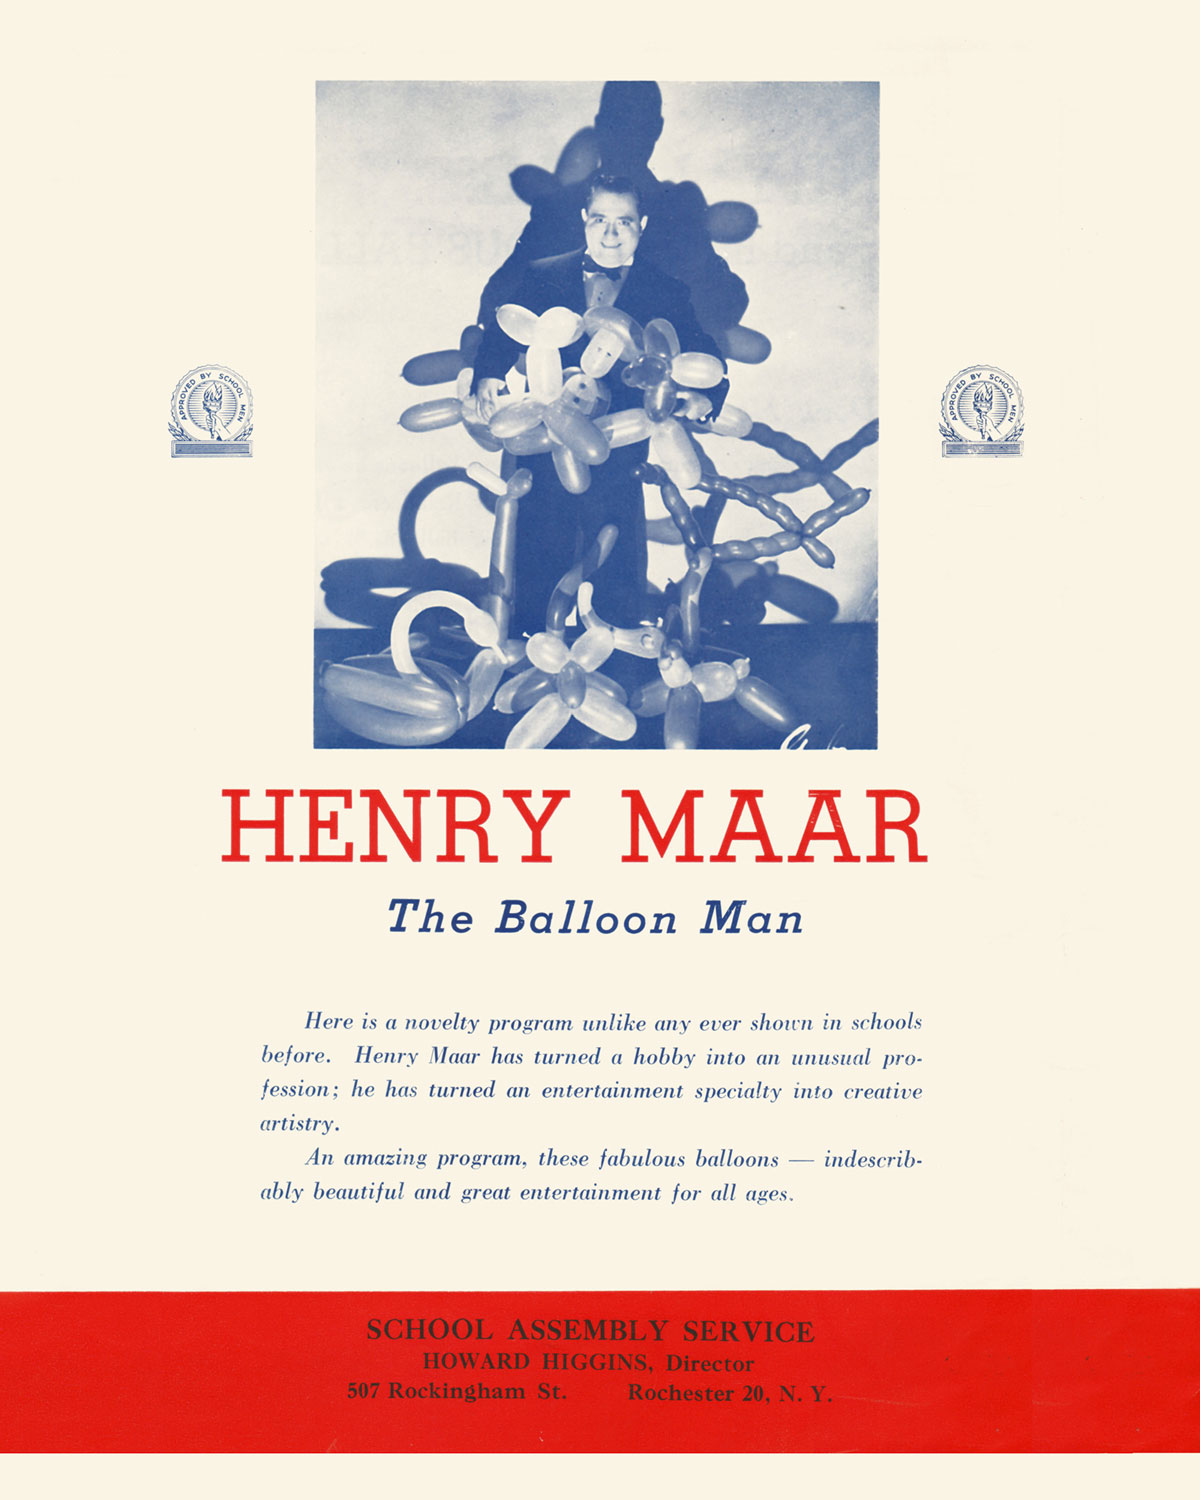 A publicity brochure from the late 1940s for Henry Maar, otherwise known as “The Balloon Man.”